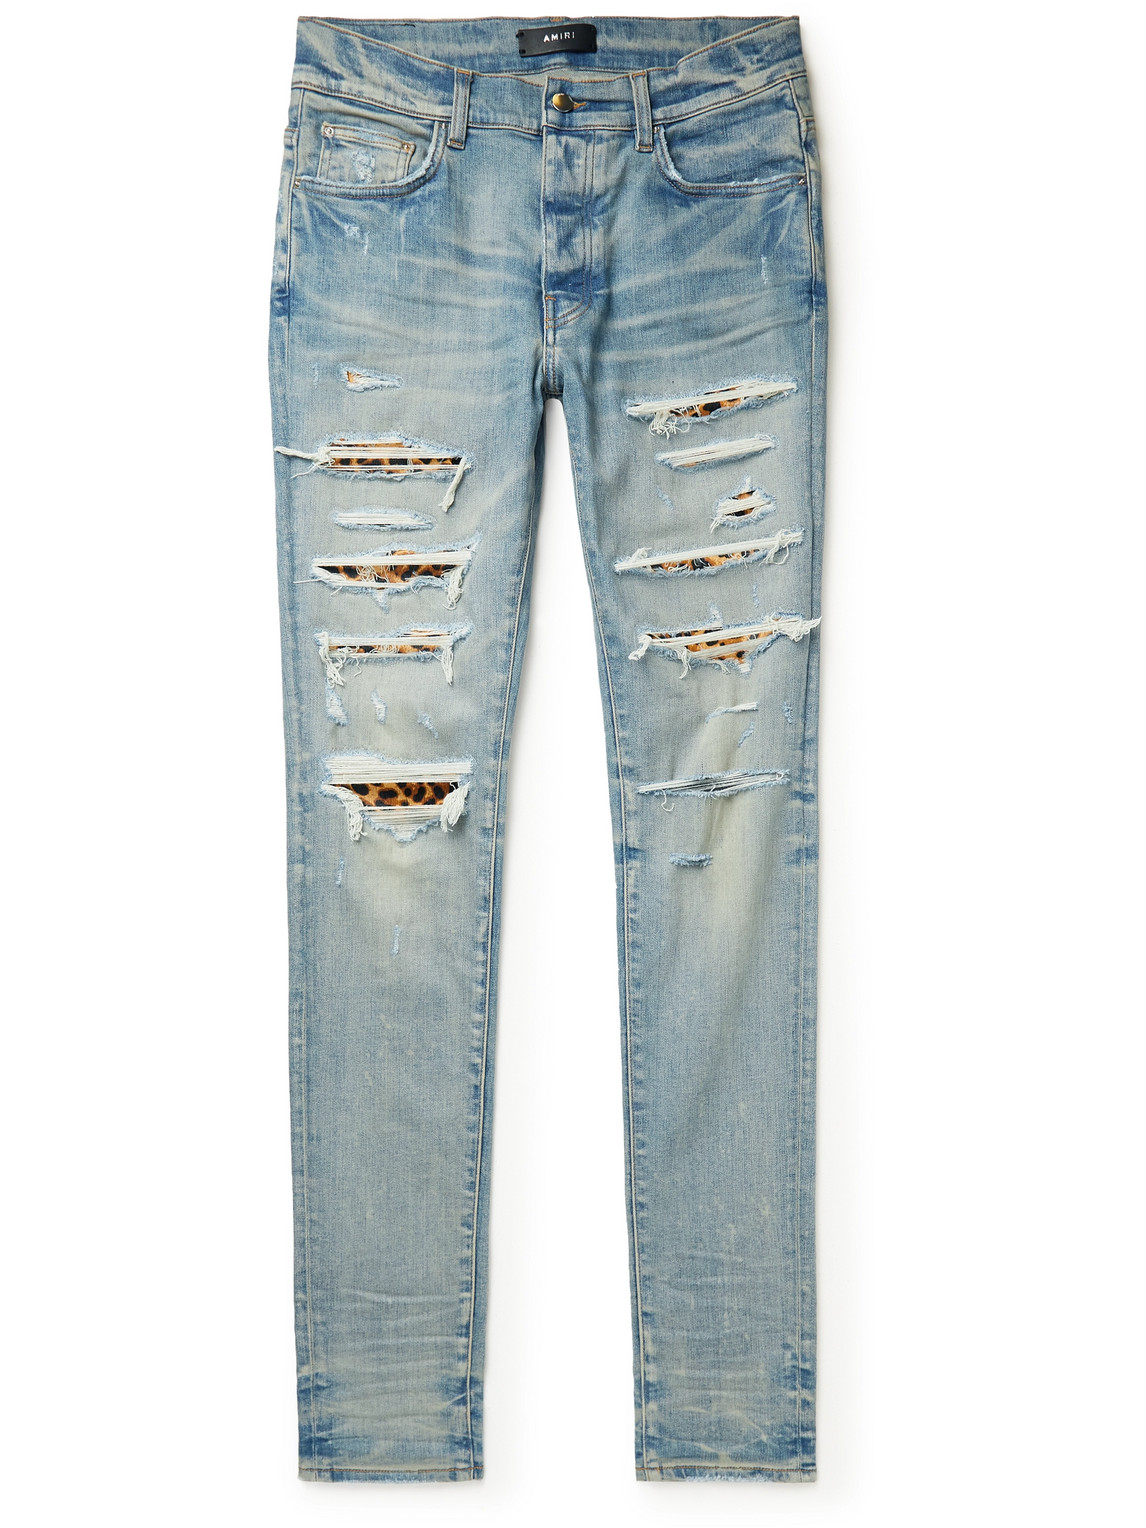 Thrasher Skinny-Fit Distressed Panelled Jeans